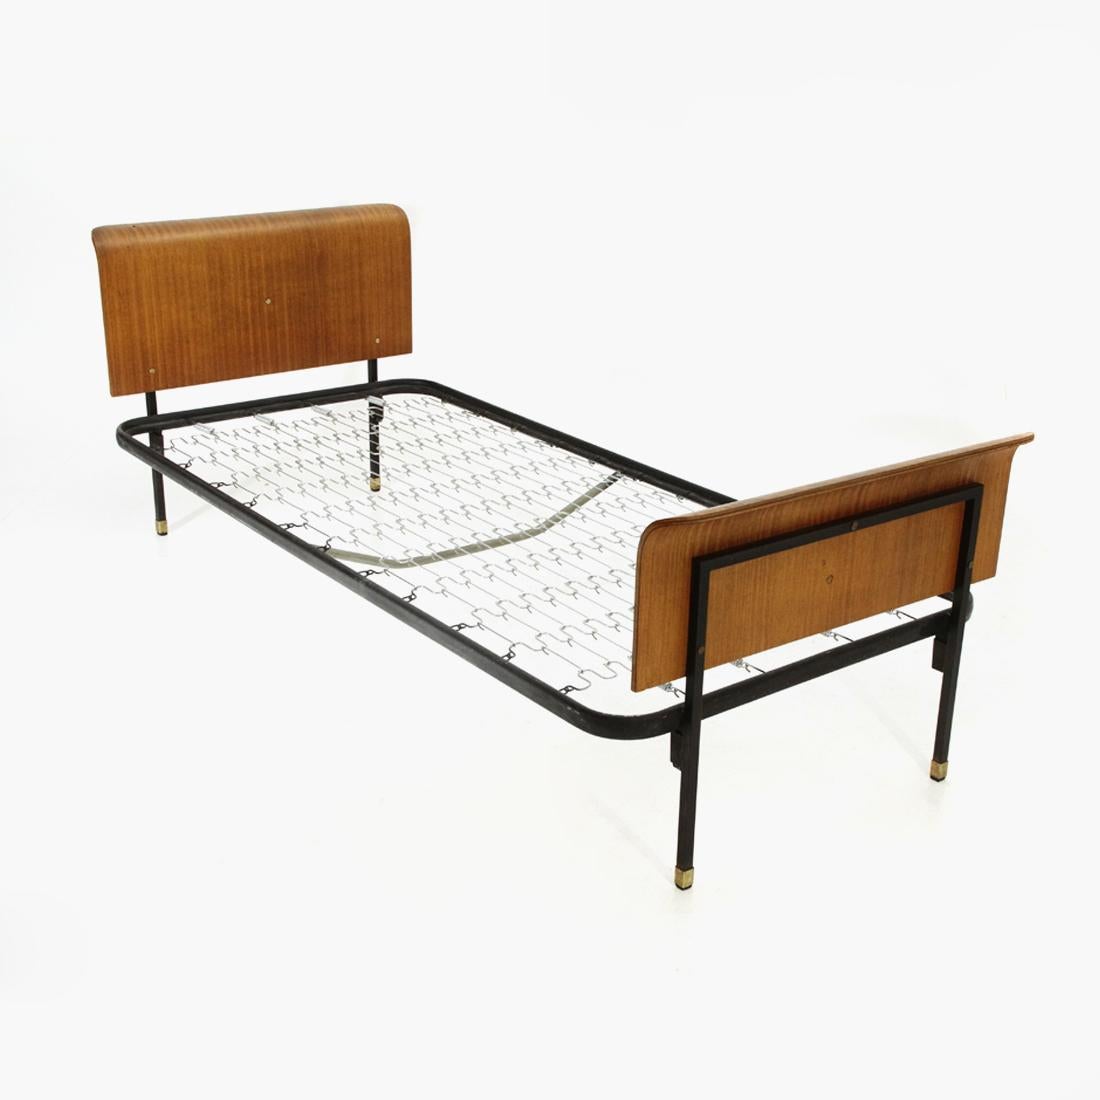 Bed manufactured in Italy, produced in the 1950s.
Structure in black painted metal.
Headboard and footboard in curved plywood.
Brass feet and screws.
Good general condition, some signs, lack of paint and veneer due to normal use over time, a